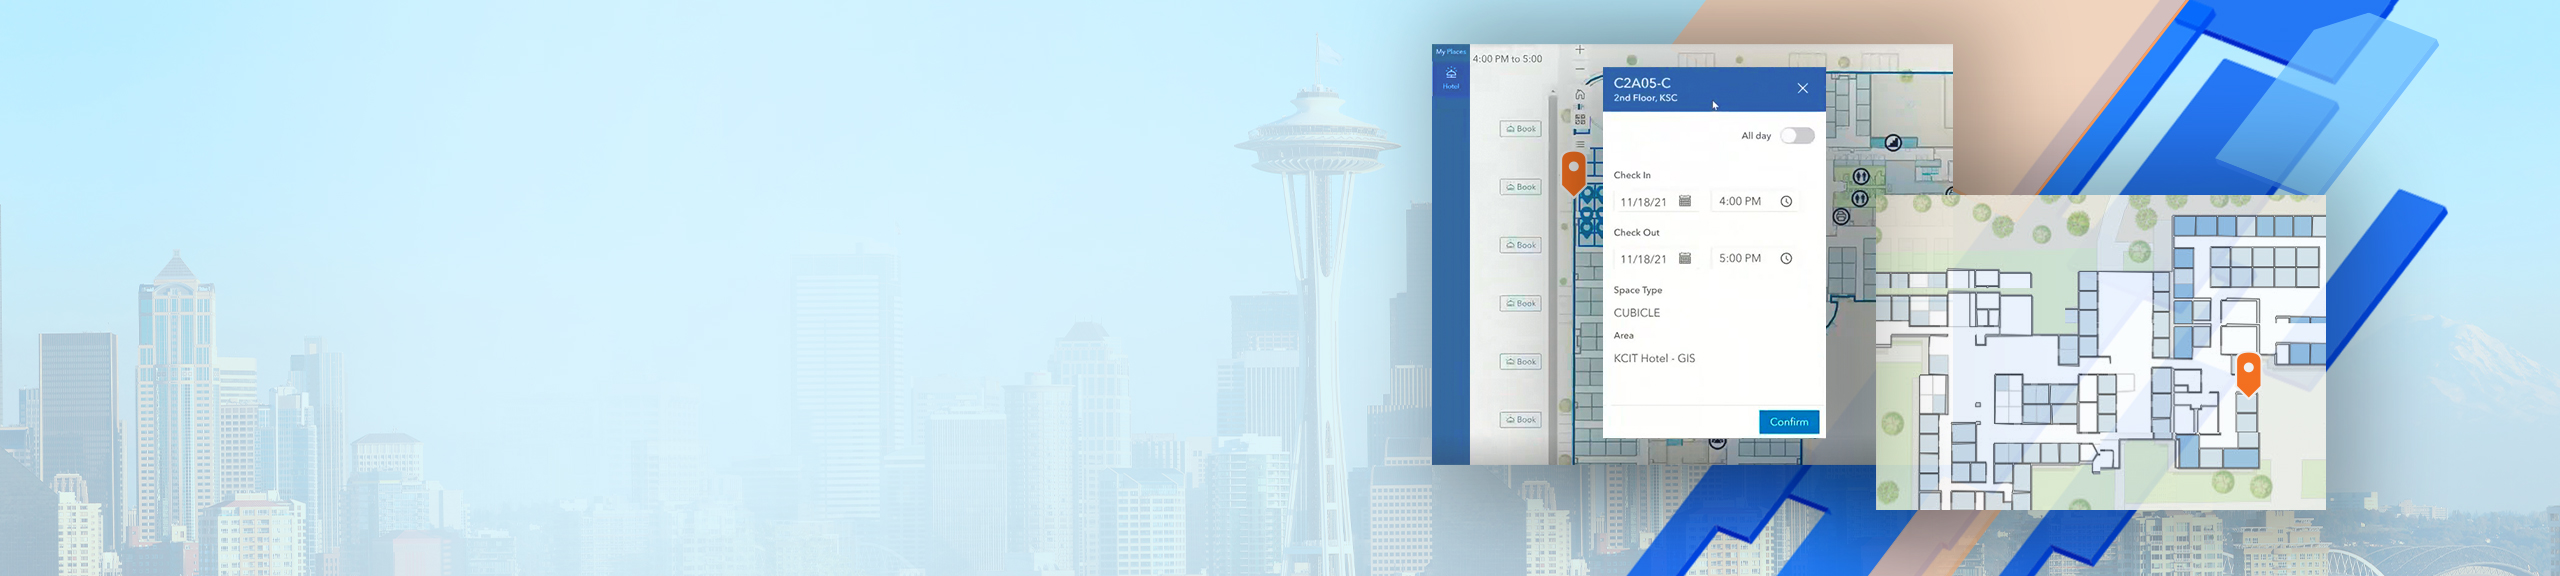 The Seattle skyline overlaid with graphic elements and three displays of indoor GIS software interfaces.